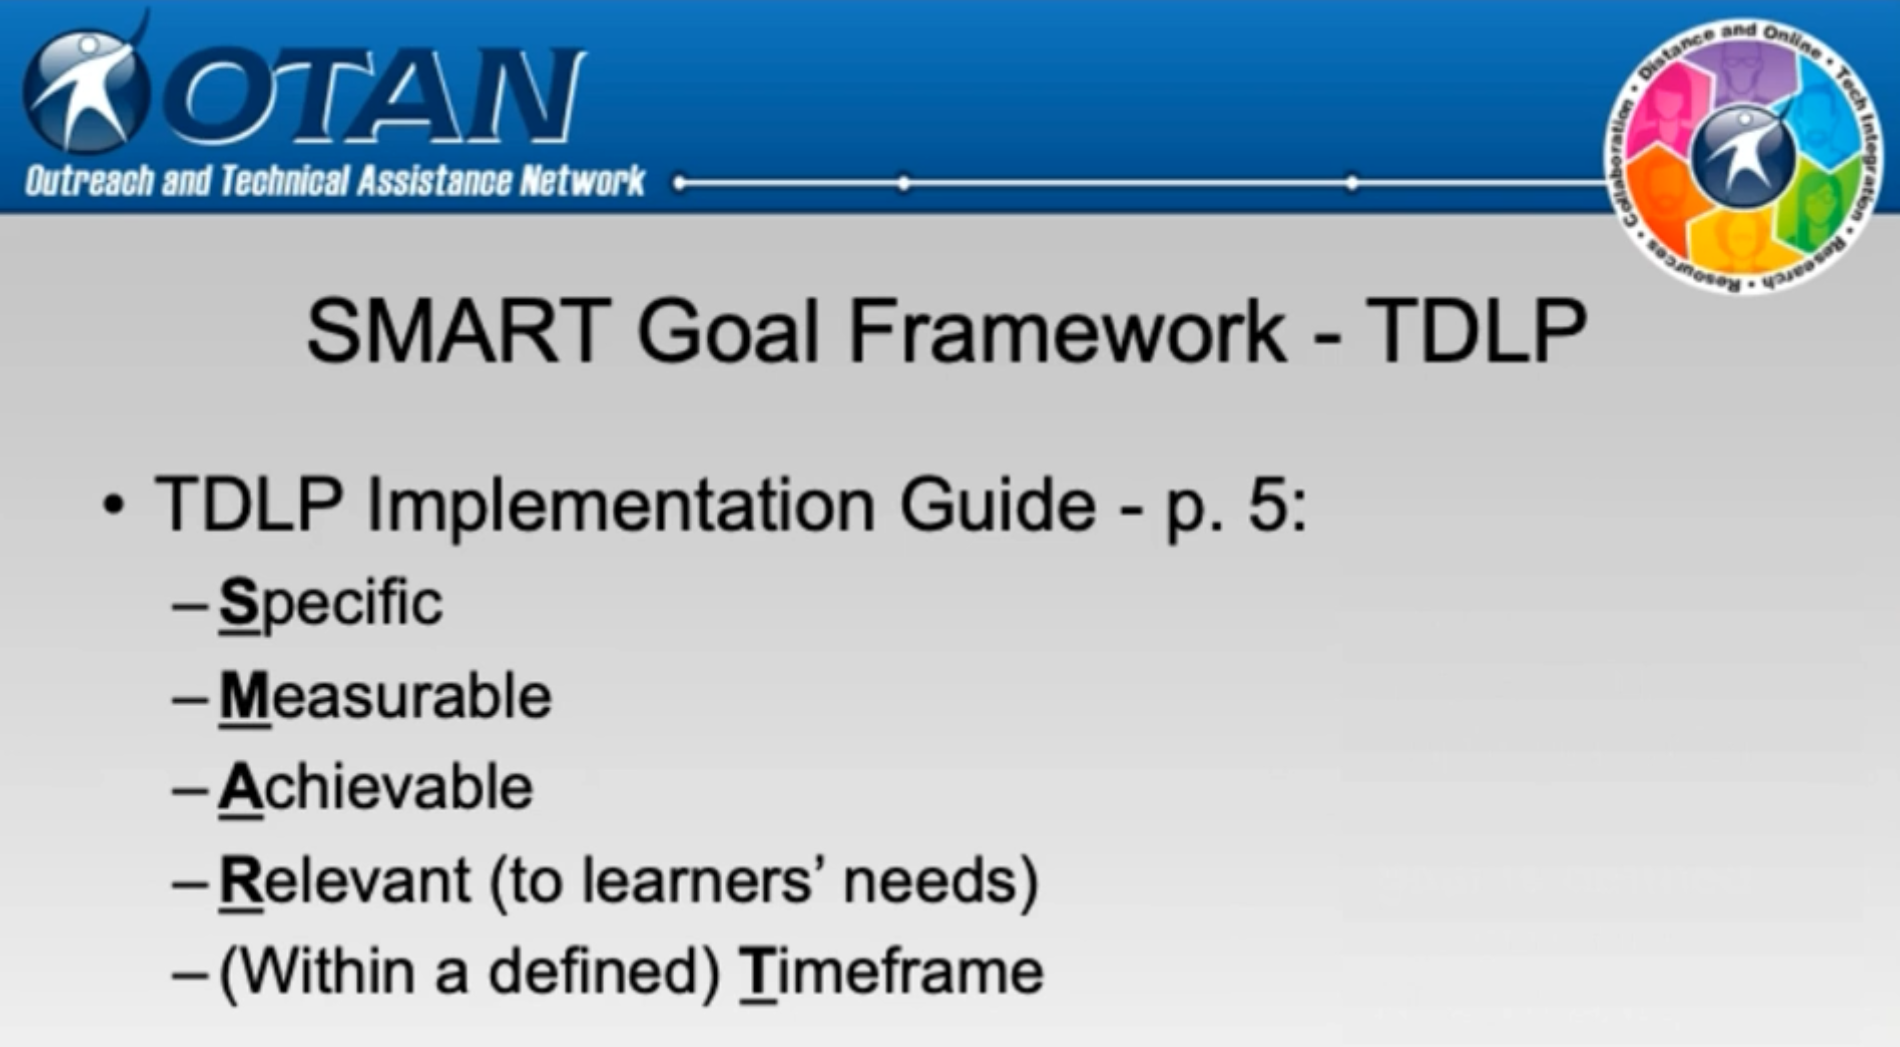 SMART Goal Framework slide. Specific, Measurable, Achievable, Relevant (to learners' needs), (Within a defined) Timeframe